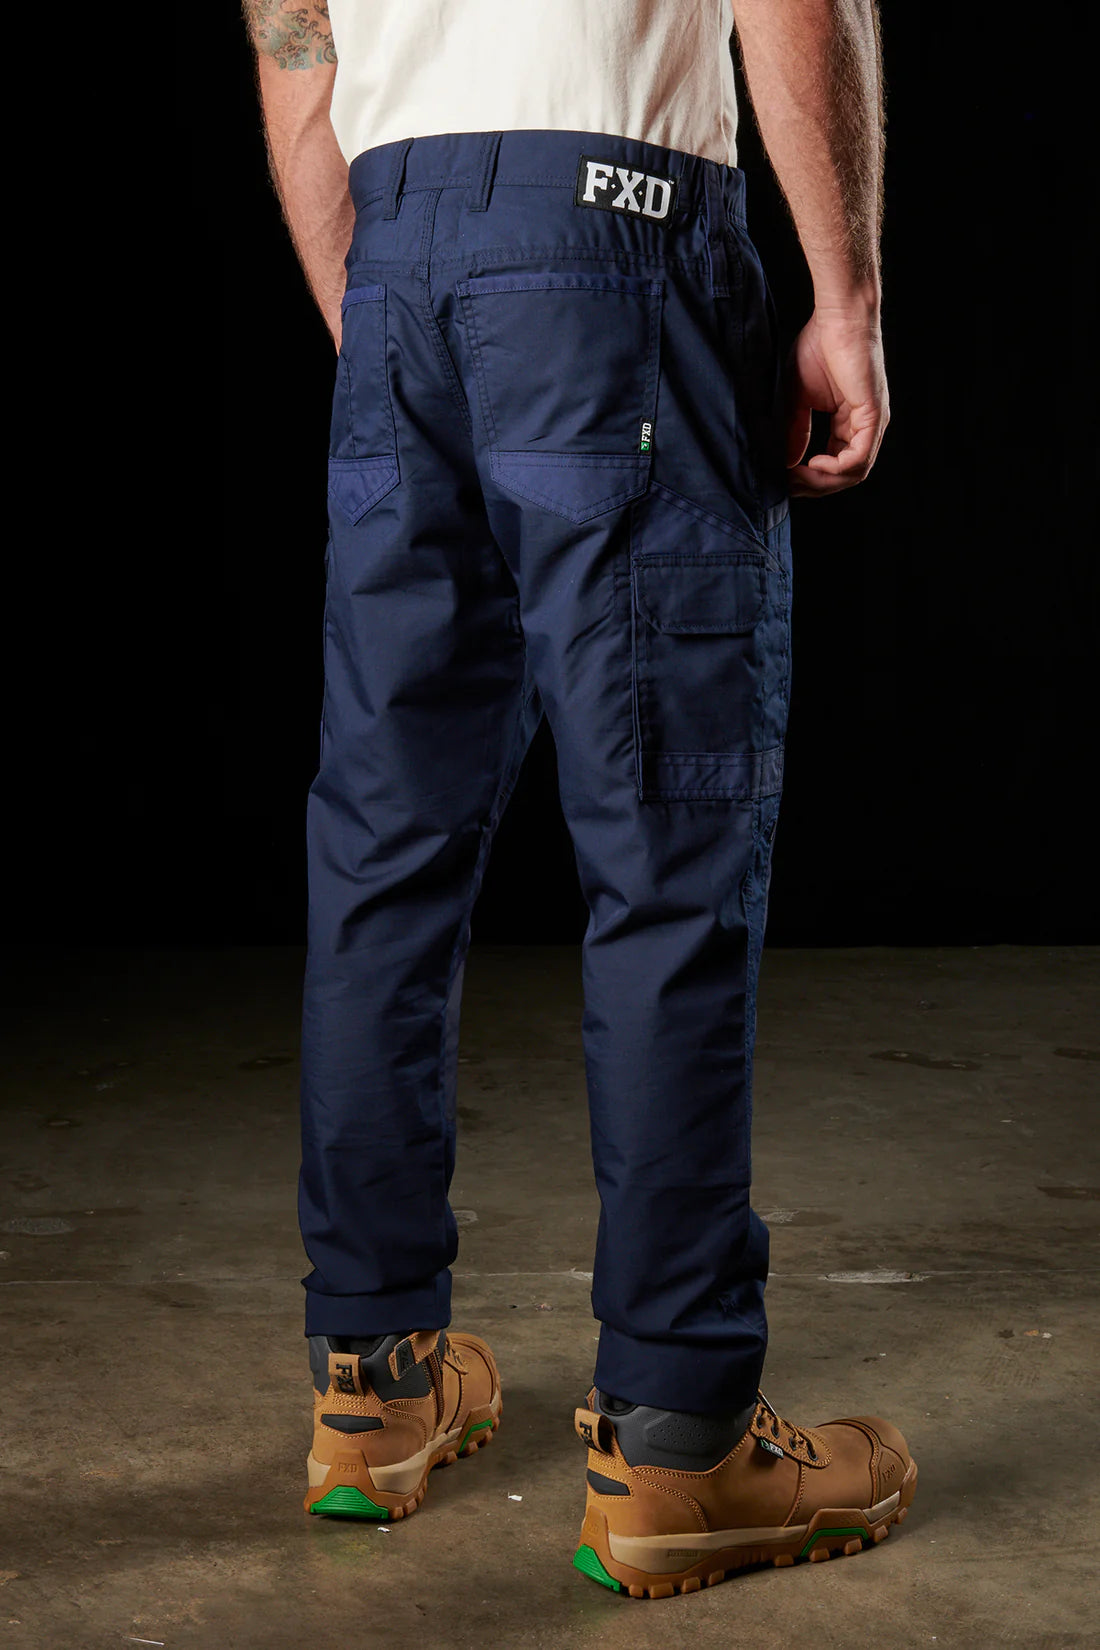 FXD Work Pants WP5 Adelaide